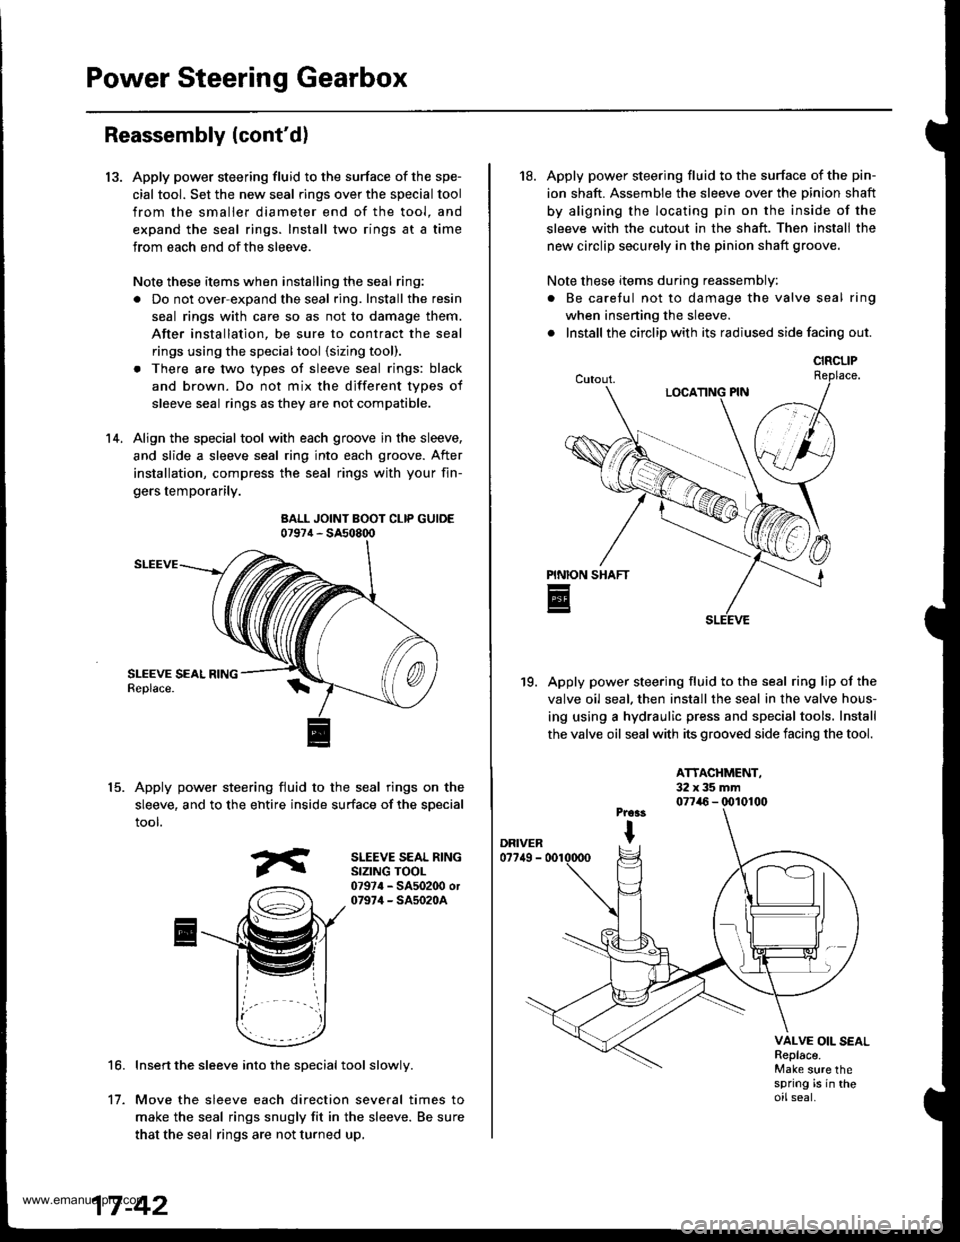 HONDA CR-V 1999 RD1-RD3 / 1.G Workshop Manual 
Power Steering Gearbox
13.
Reassembly (contd)
Apply power steering fluid to the surface of the spe-
cial tool. Set the new seal rings over the special tool
from the smaller diameter end of the tool.